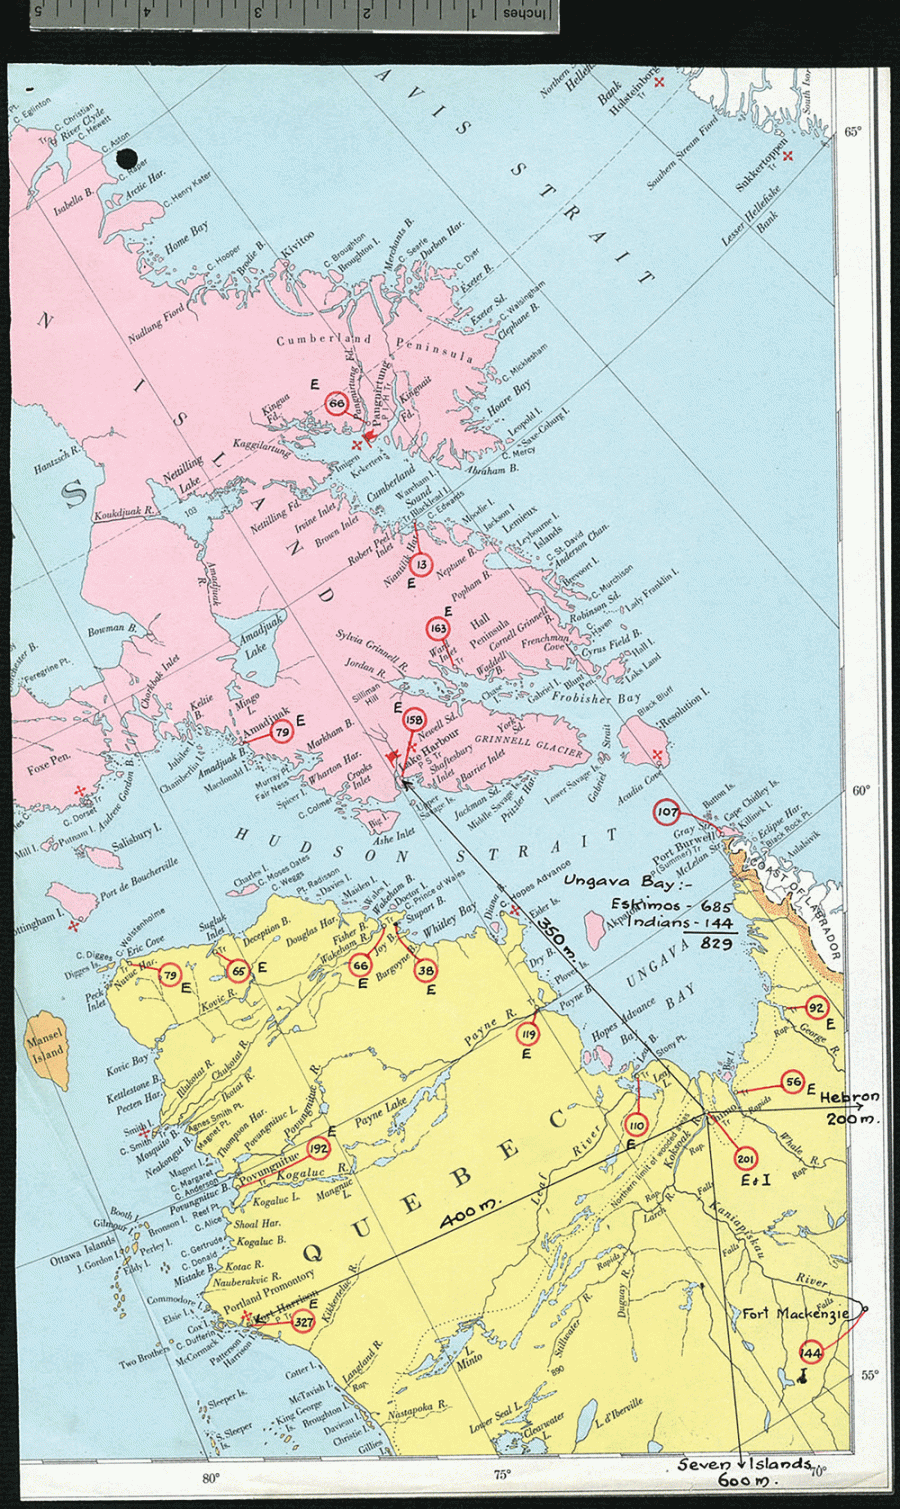 Coloured map showing the demographics in 1941